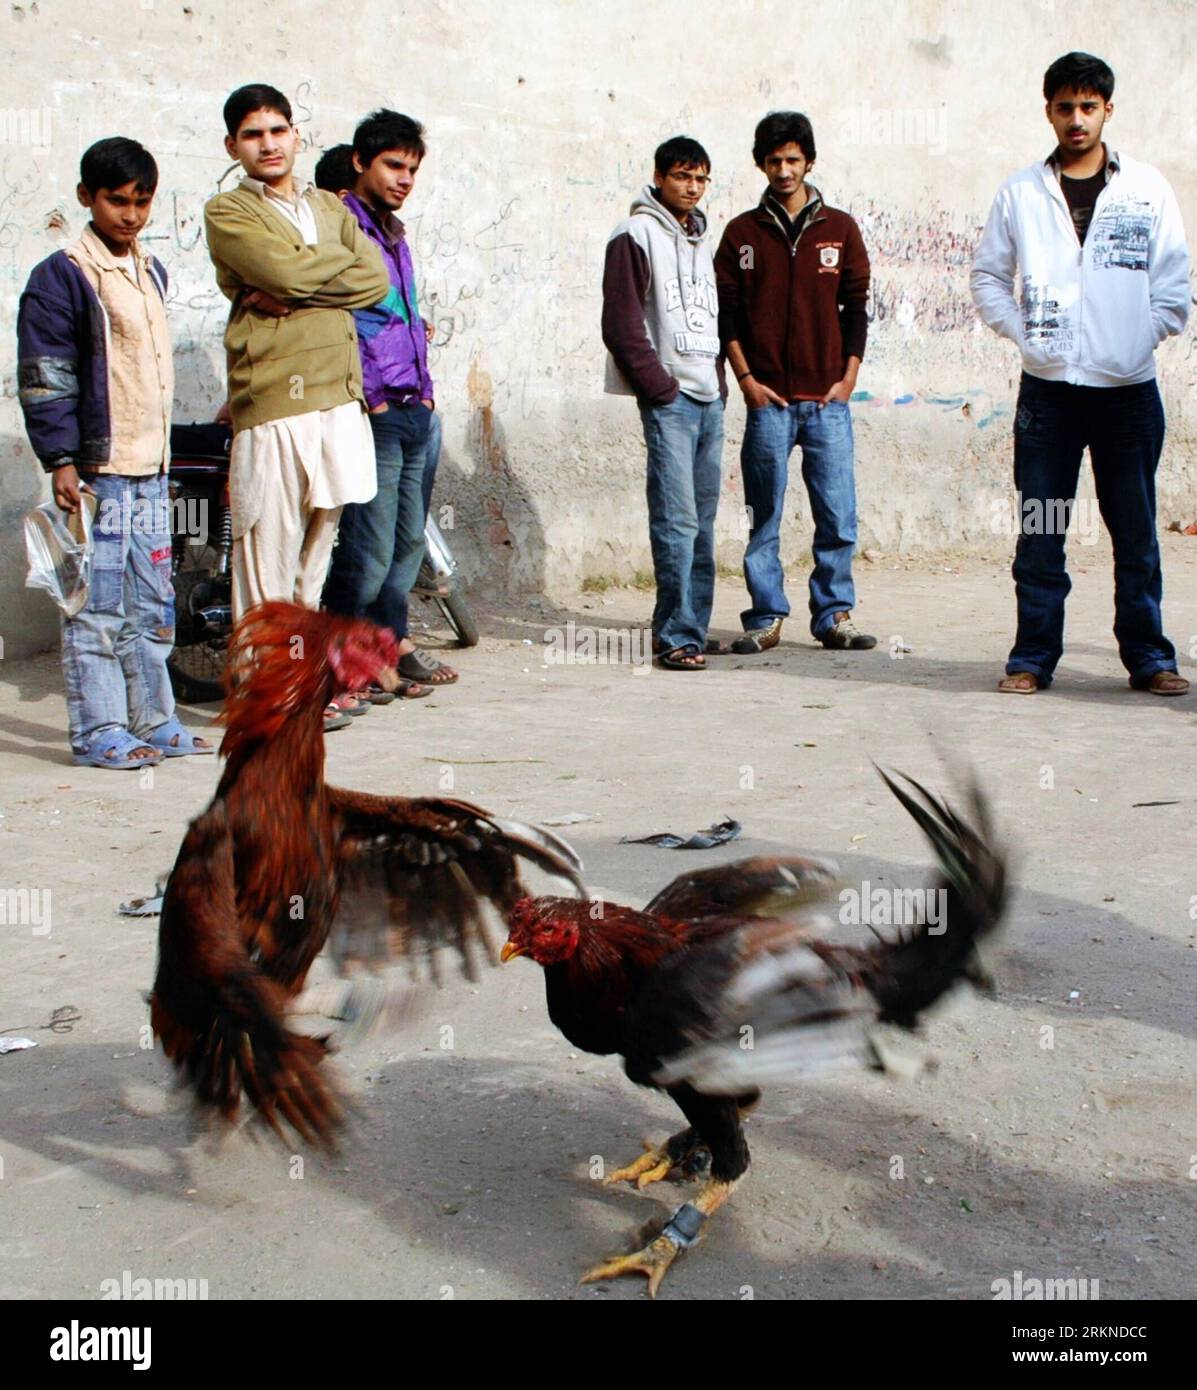 Bildnummer: 57093177  Datum: 20.02.2012  Copyright: imago/Xinhua (120220) -- LAHORE, Feb. 20, 2012 (Xinhua) -- Pakistani men watch a rooster fight in a Christian neighborhood of eastern Pakistan s Lahore on Feb. 20, 2012. Rooster fighting is popular in Pakistan but the fights often take place in quiet residential streets rather than in open grounds as betting is not allowed in public places. (Xinhua/Sajjad) (dzl) PAKISTAN-LAHORE-ROOSTER FIGHT PUBLICATIONxNOTxINxCHN Gesellschaft Tier Hahn Kampf Hahnenkampf xbs x0x 2012 quadrat      57093177 Date 20 02 2012 Copyright Imago XINHUA  Lahore Feb 20 Stock Photo